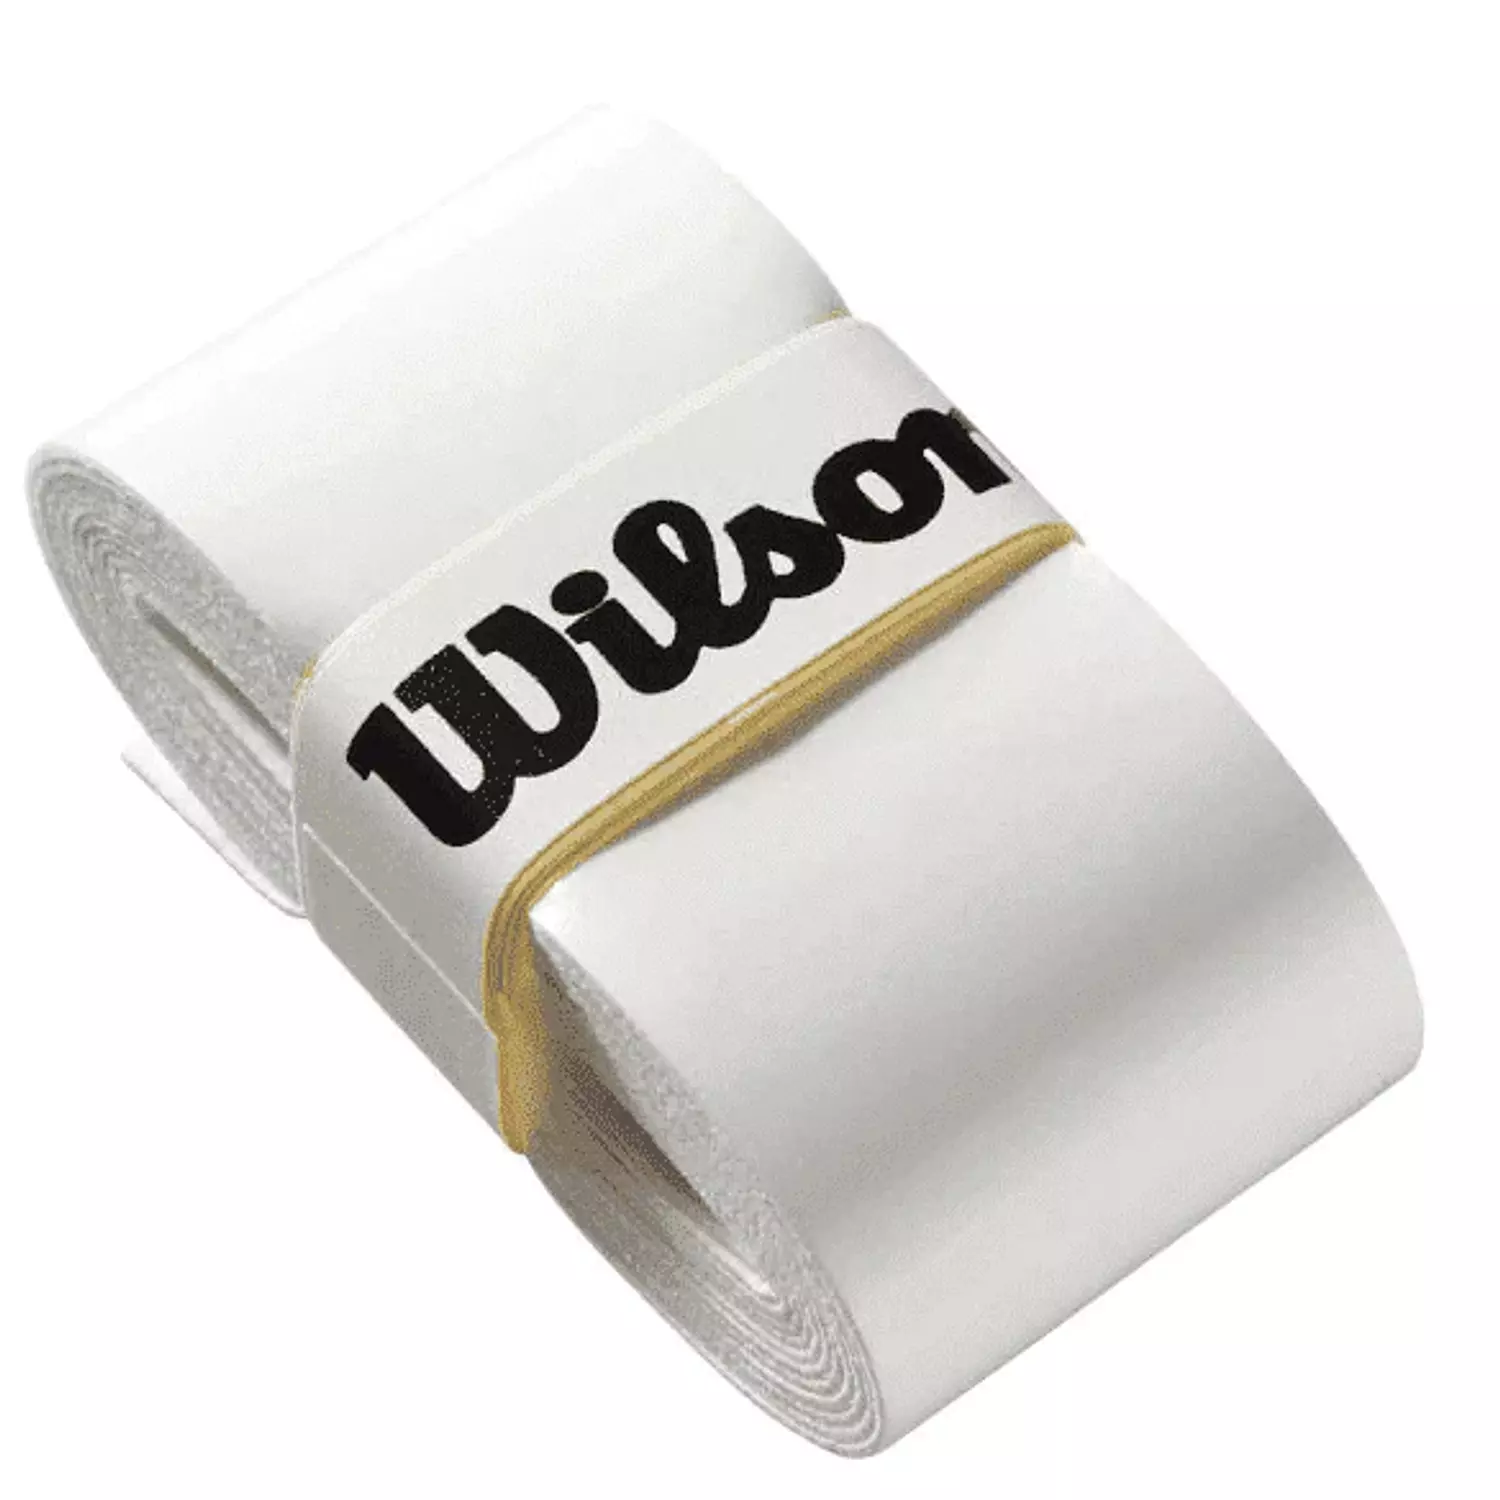  Wilson Pro Overgrip-Comfort 12 Pack. White : General Sporting  Equipment : Sports & Outdoors